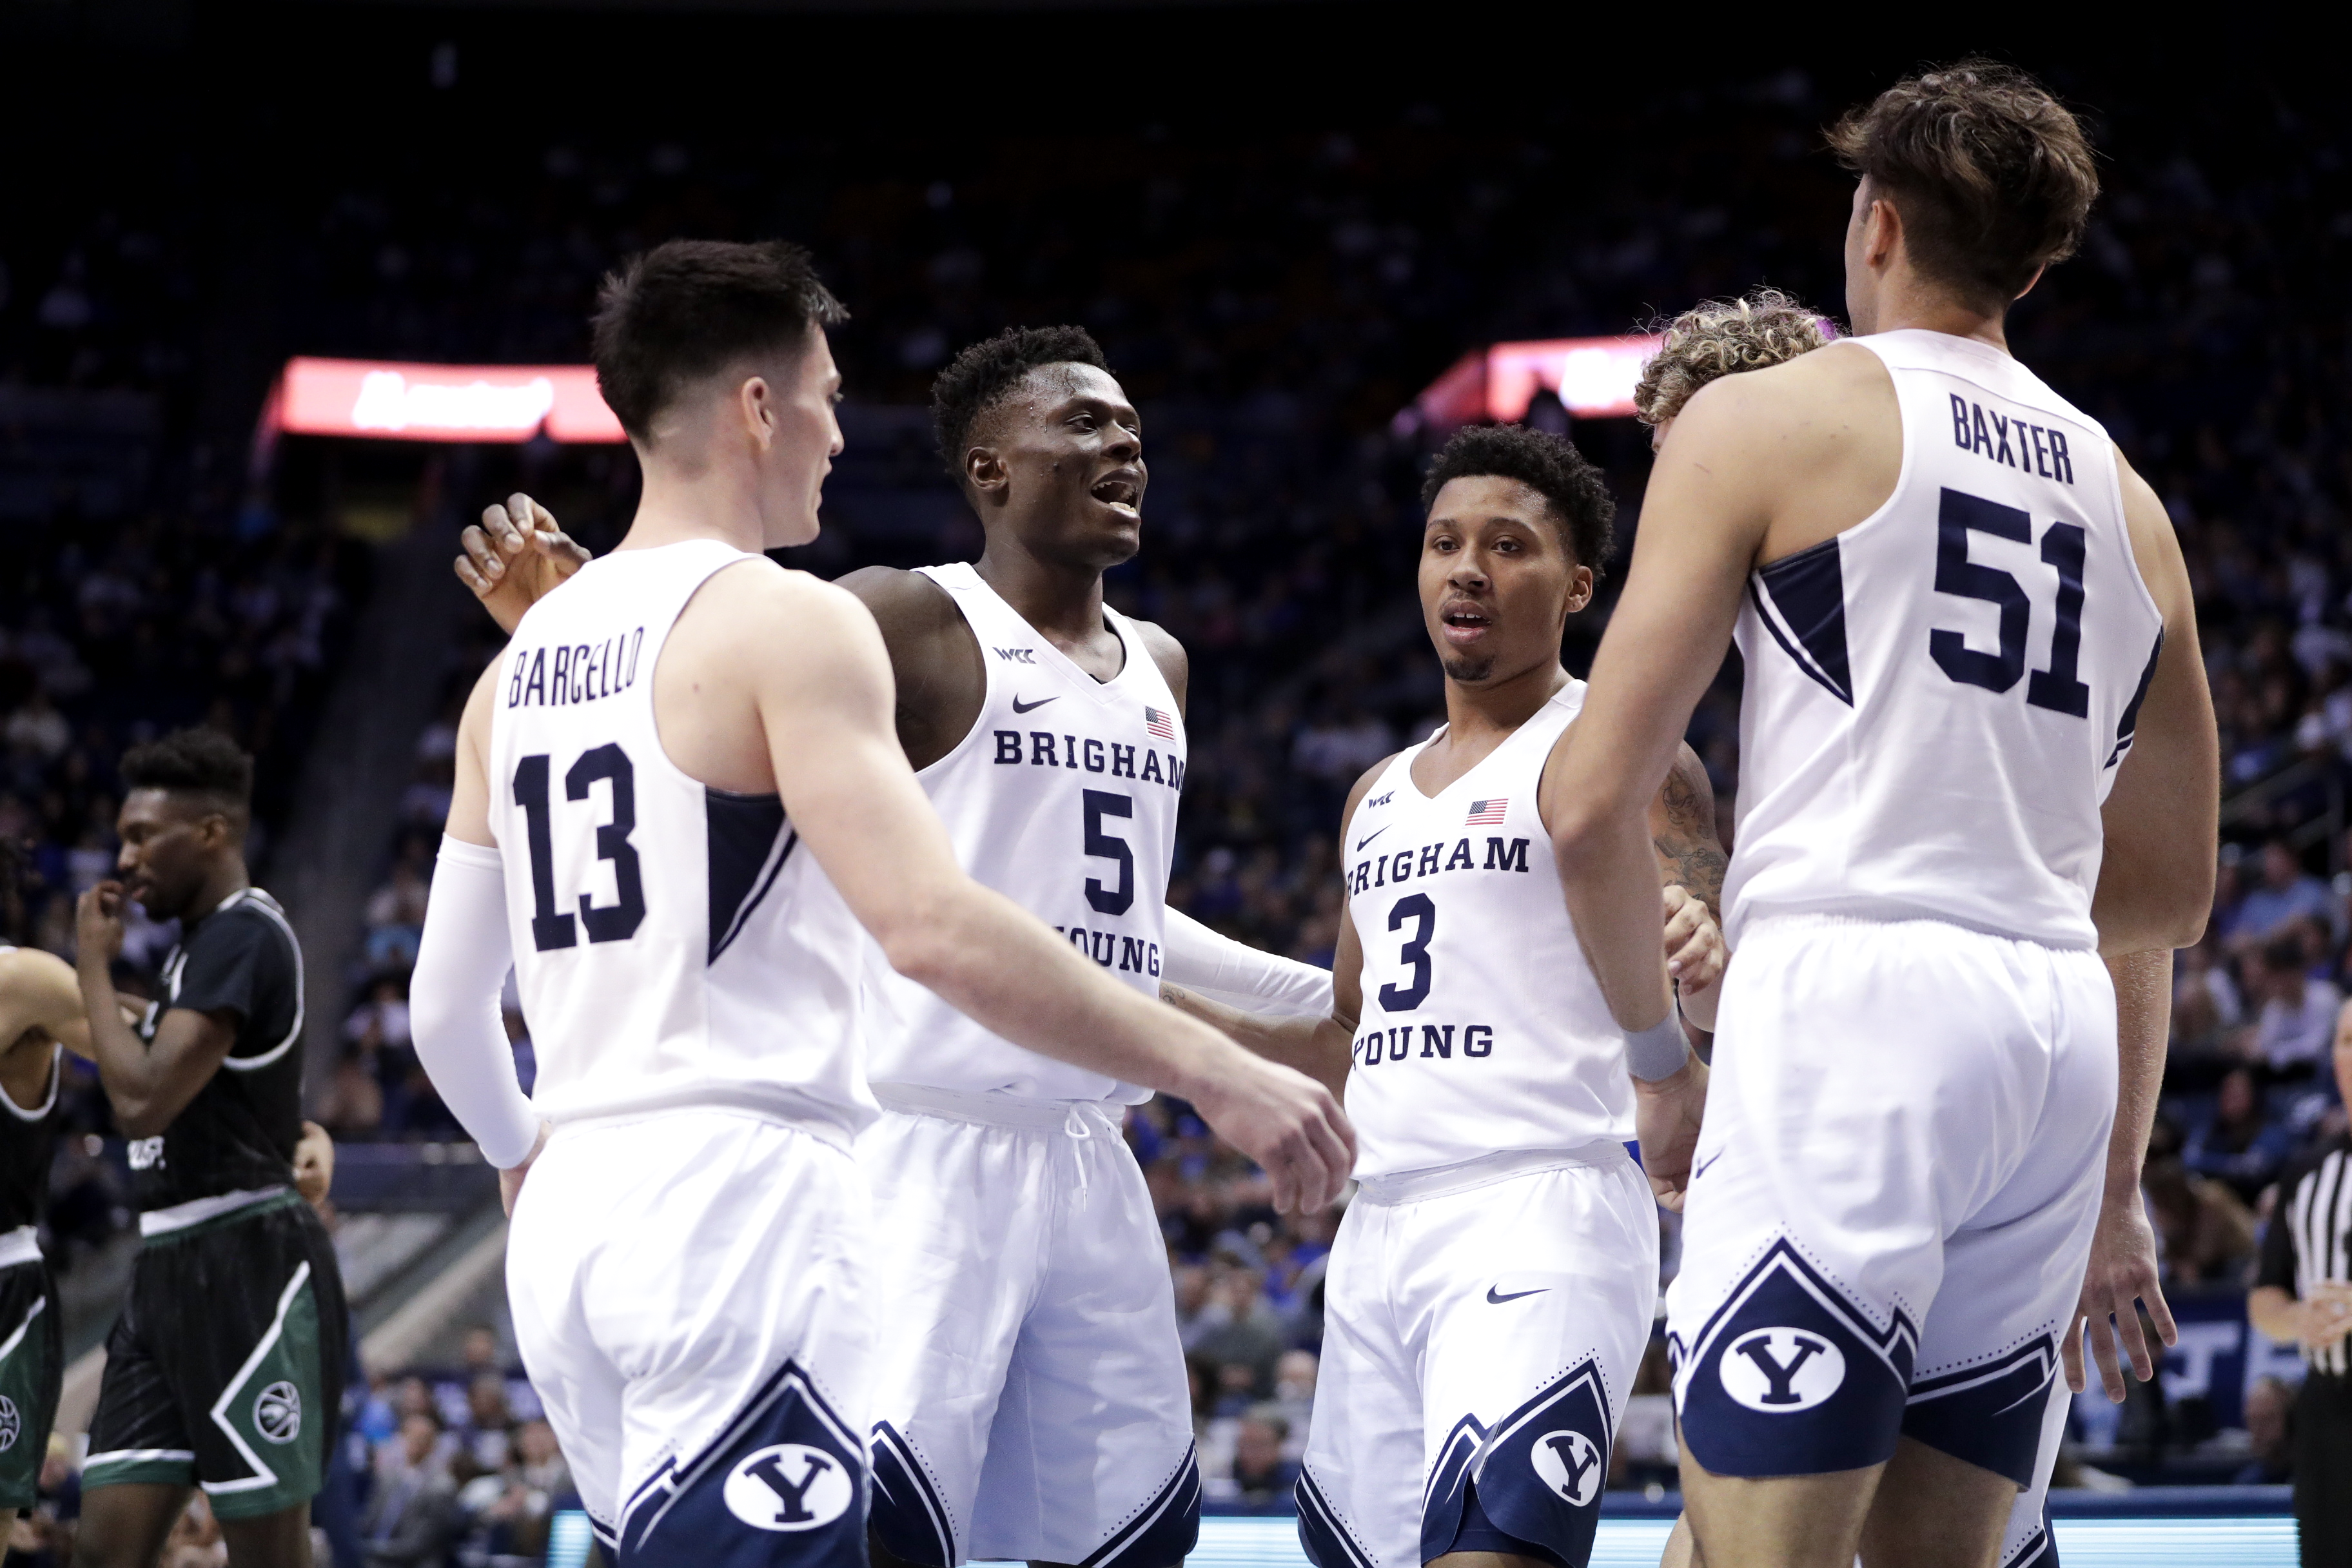 The BYU men's basketball team huddles during the Cougars 97-61 victory over Central Methodist University.